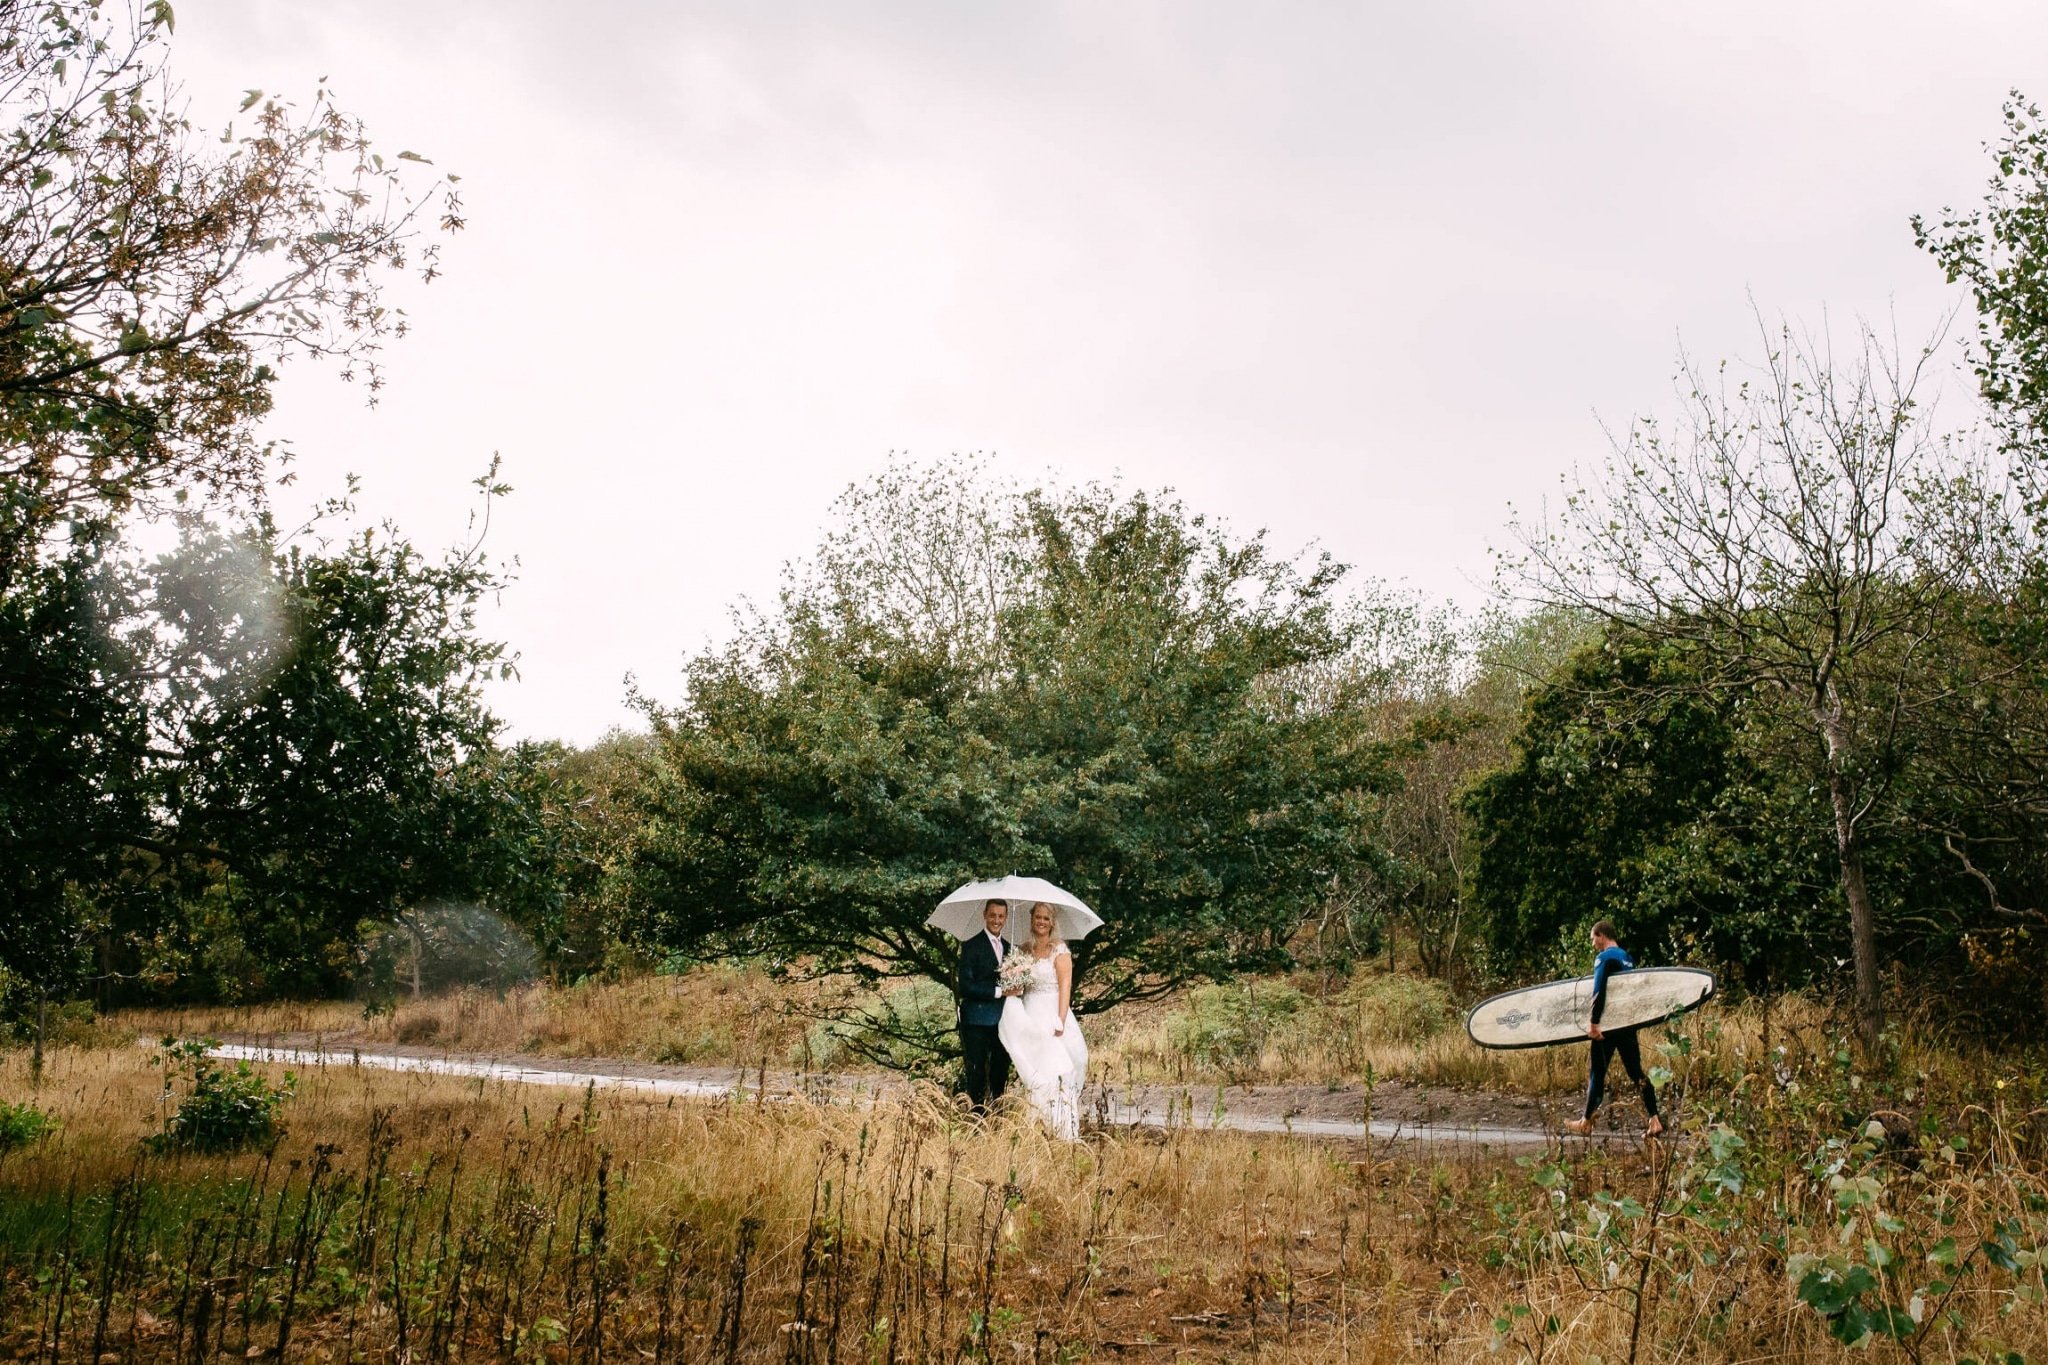 A bride and groom walk down a path with an umbrella.